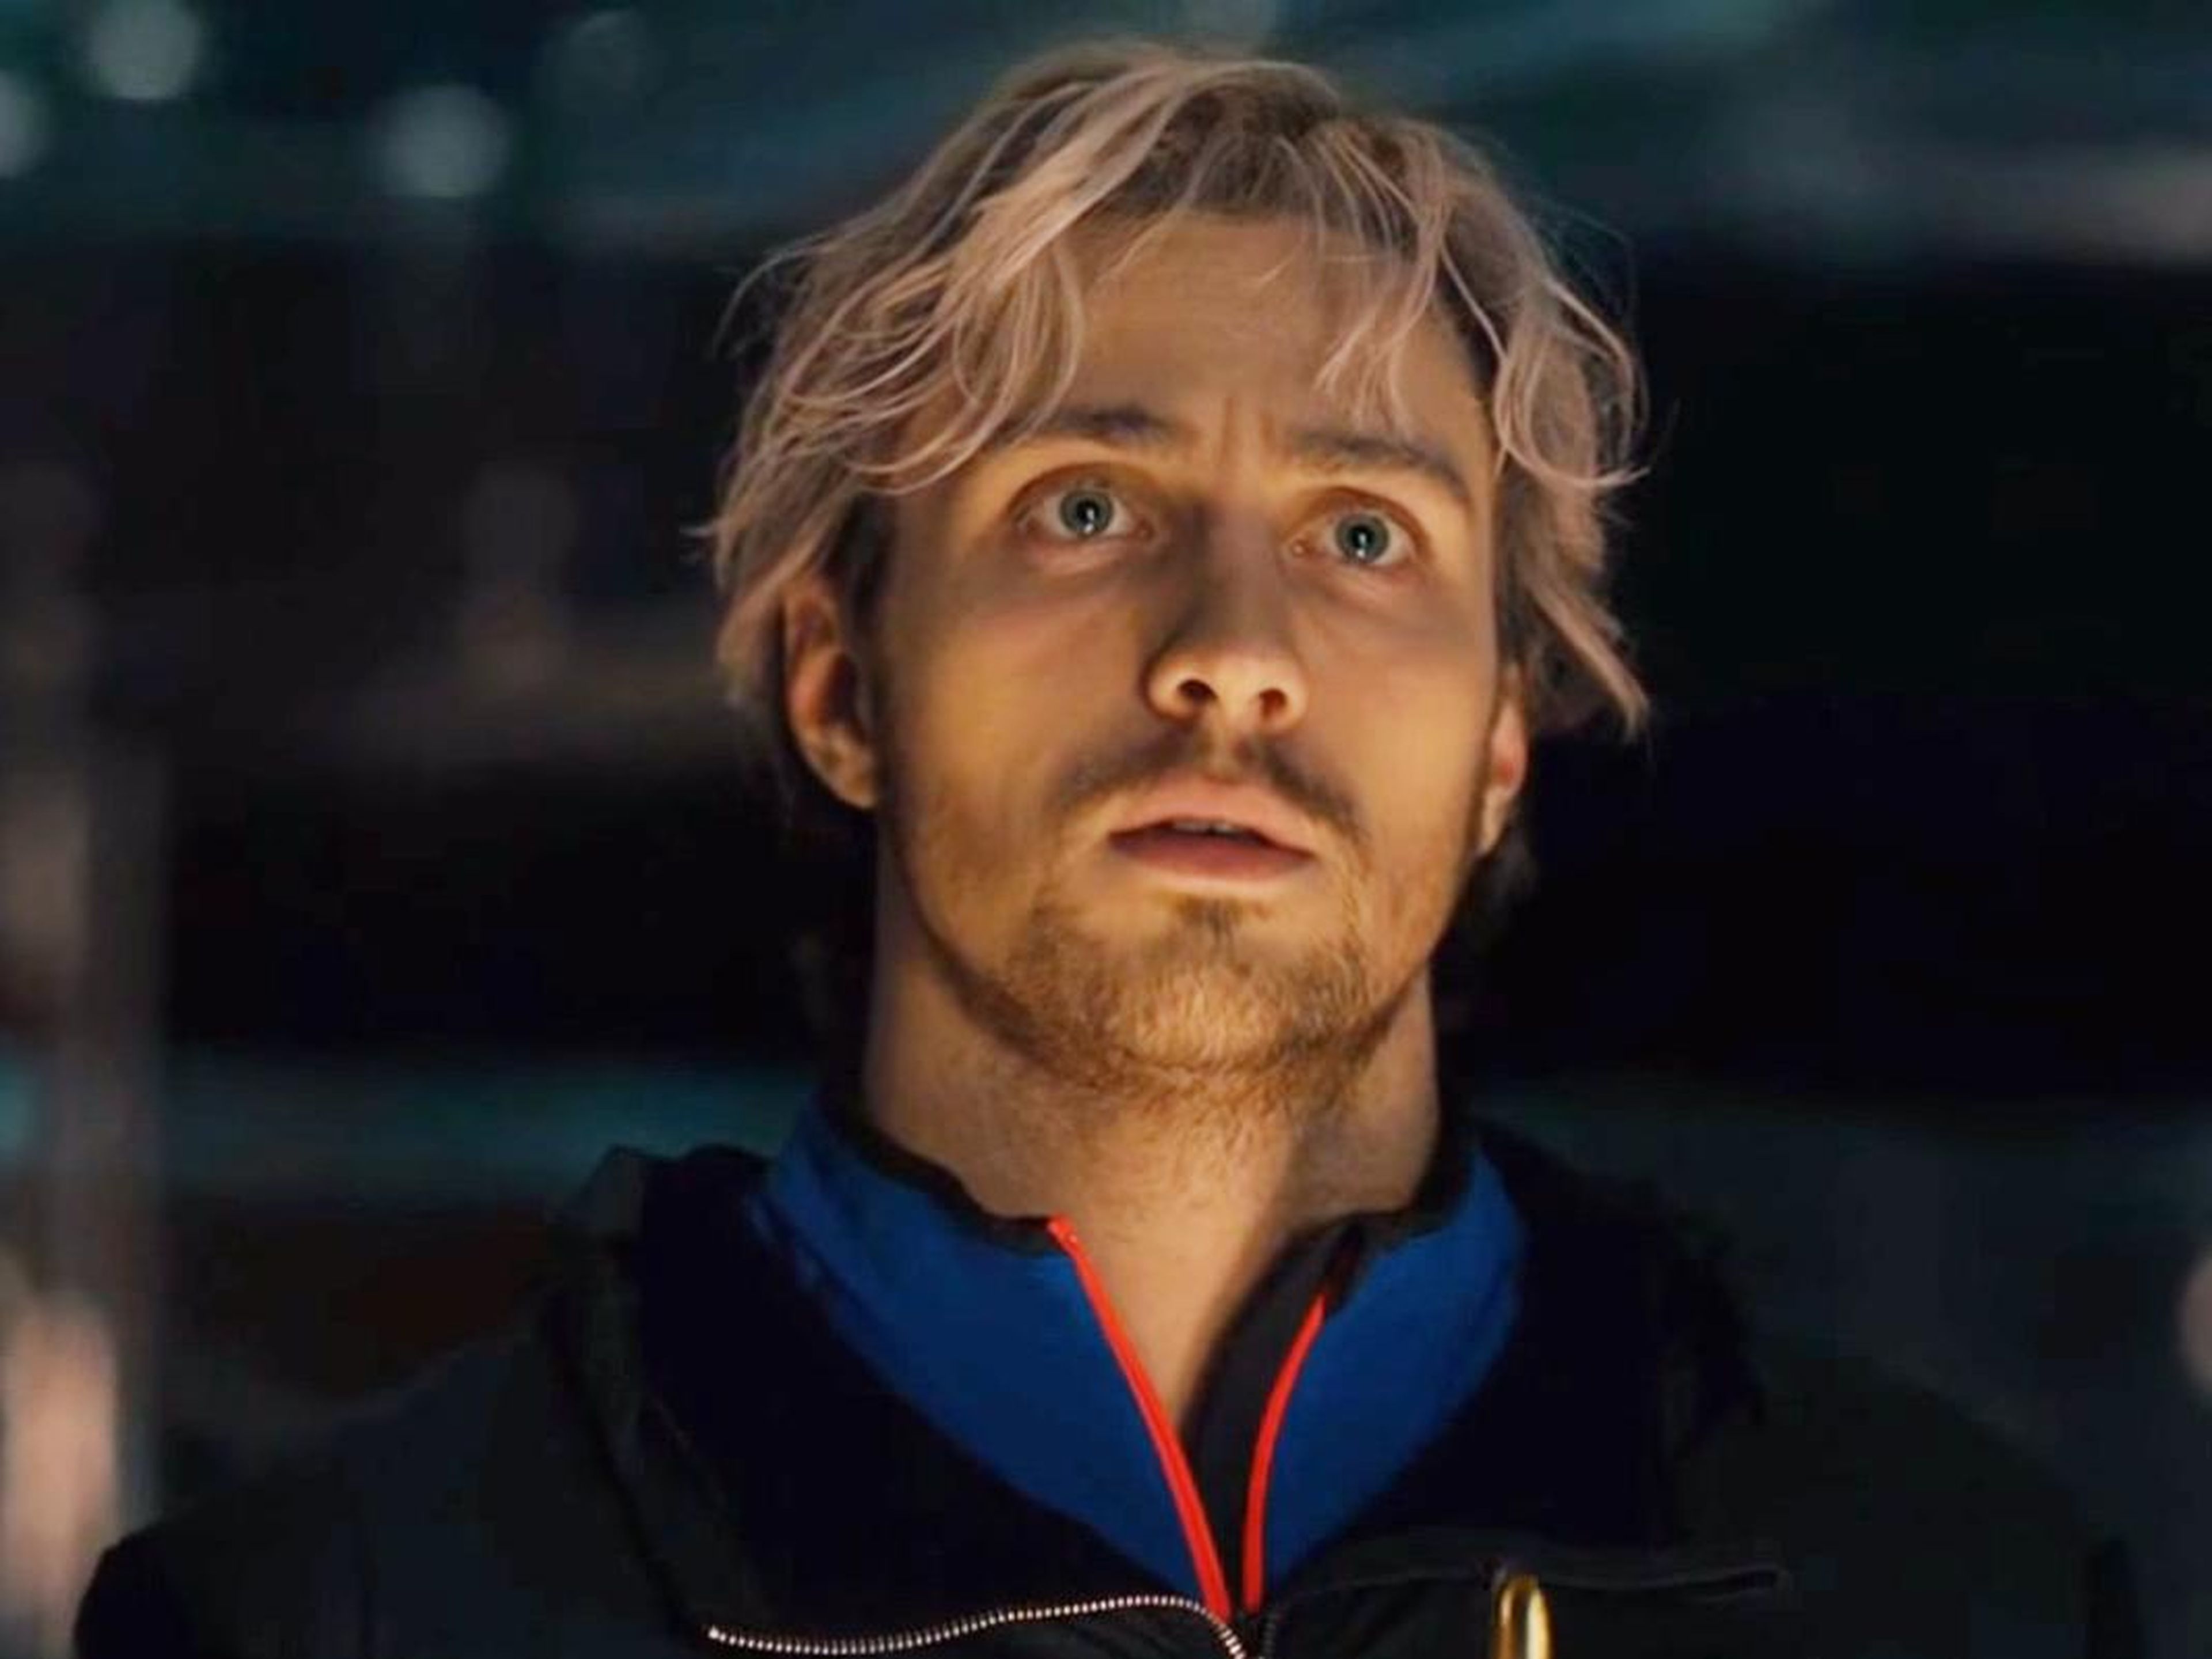 20. Quicksilver/Pietro Maximoff — played by Aaron Taylor Johnson